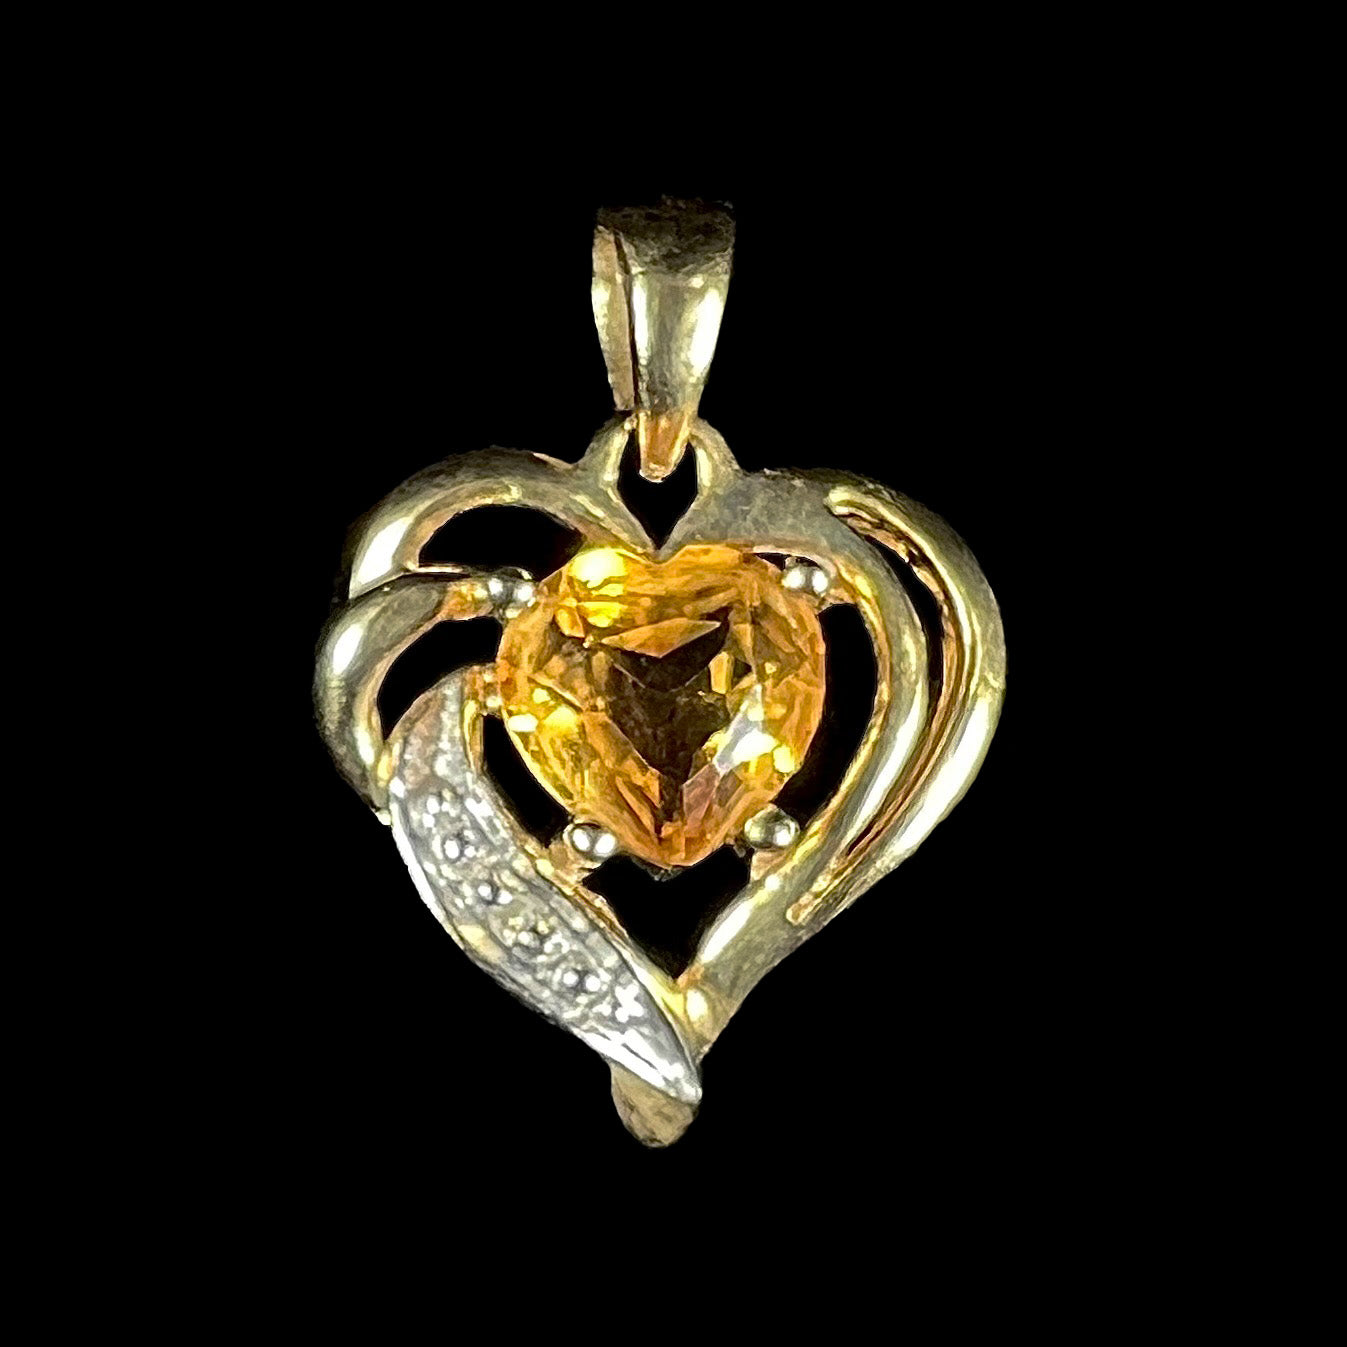 A ladies' yellow gold pendant set with a heart cut citrine stone and a diamond accent.